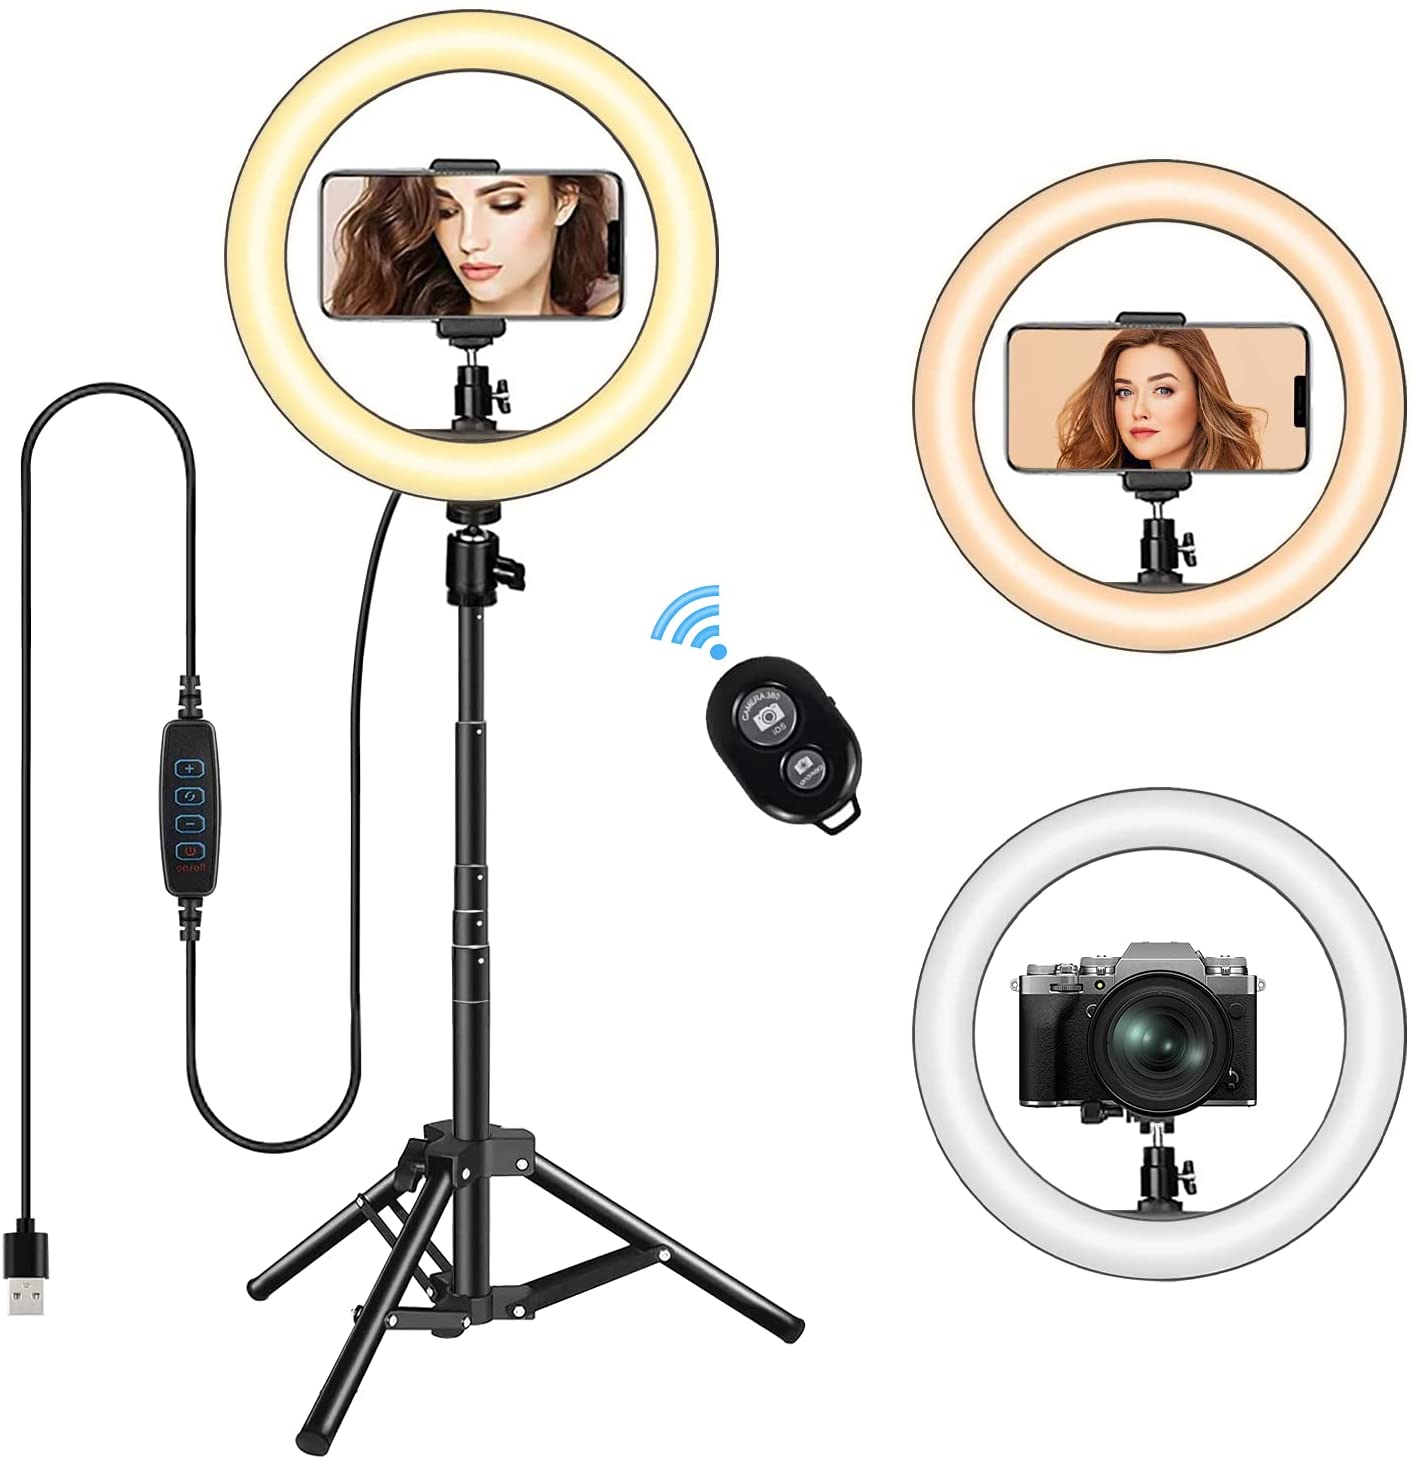 ring light with stand phone light rings ring light ring light amazon ring light on stand ring light phone ring light stand ring light with stand amazon ring light with stand and phone holder ring light with stand for makeup ring lighting ring lighting amazon ring lights ring lights amazon ring lights with stand selfie lighting